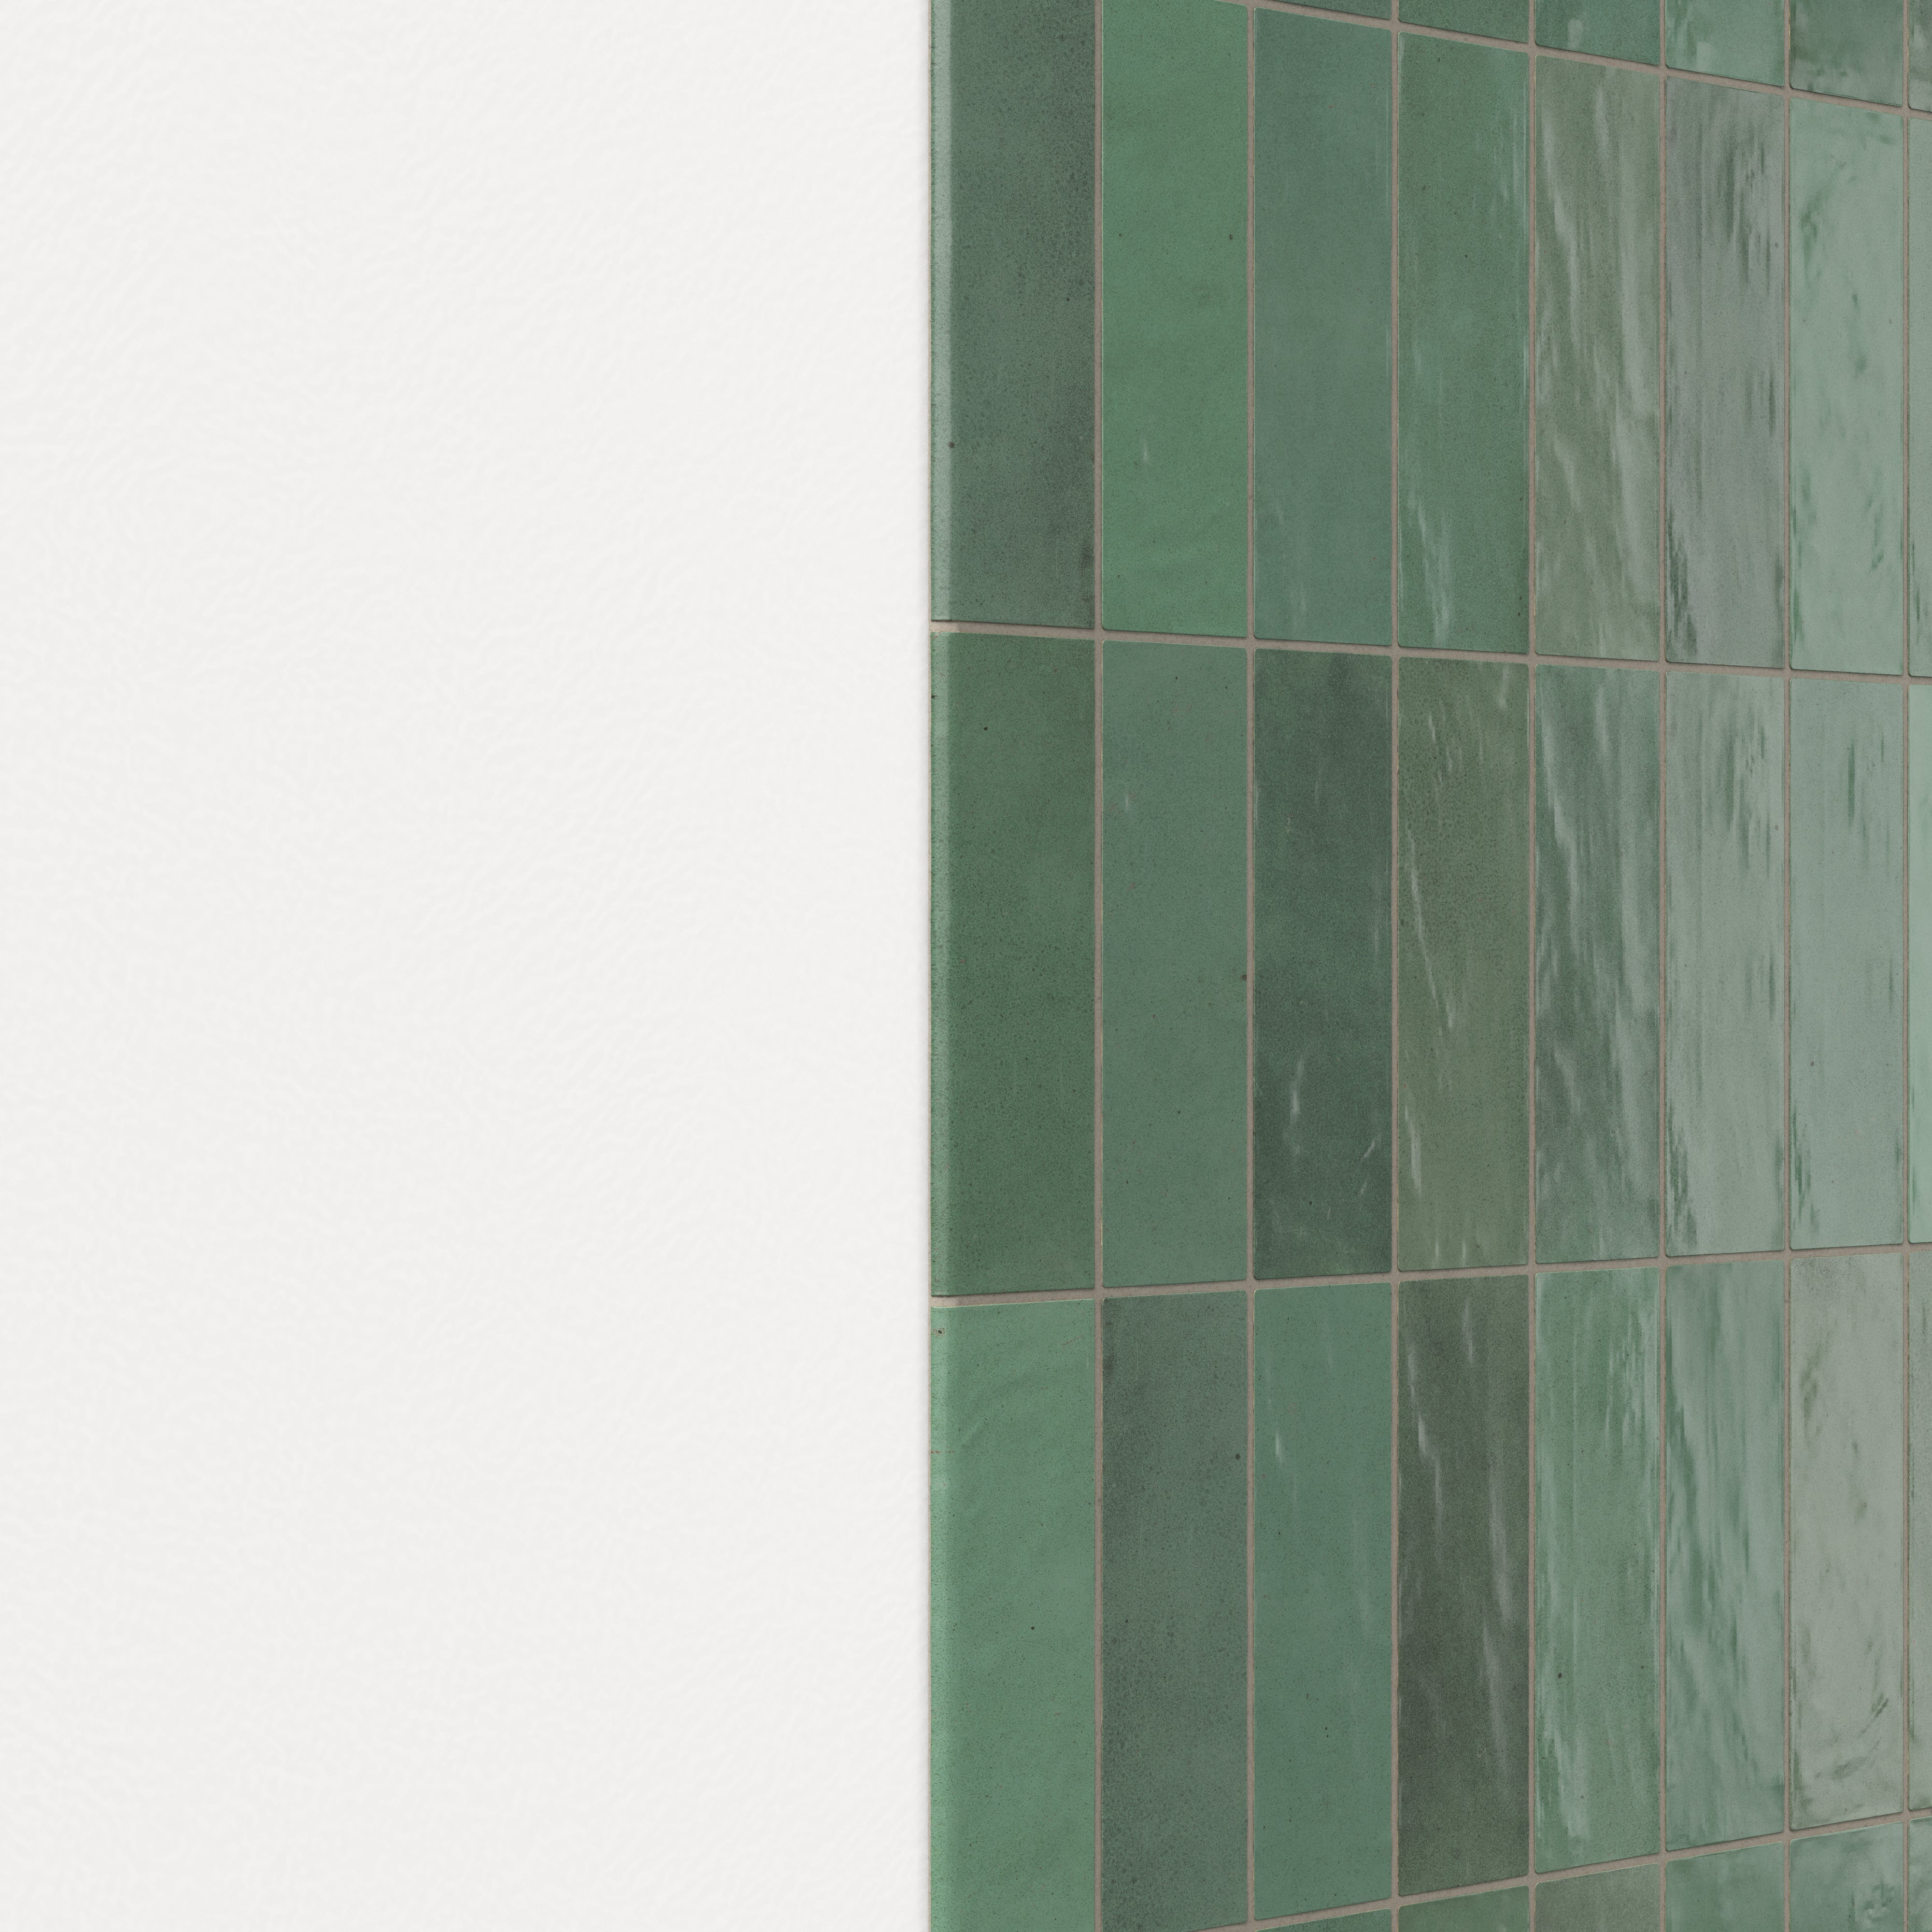 Everly 3x8 Matte Ceramic Bullnose Tile in Forest